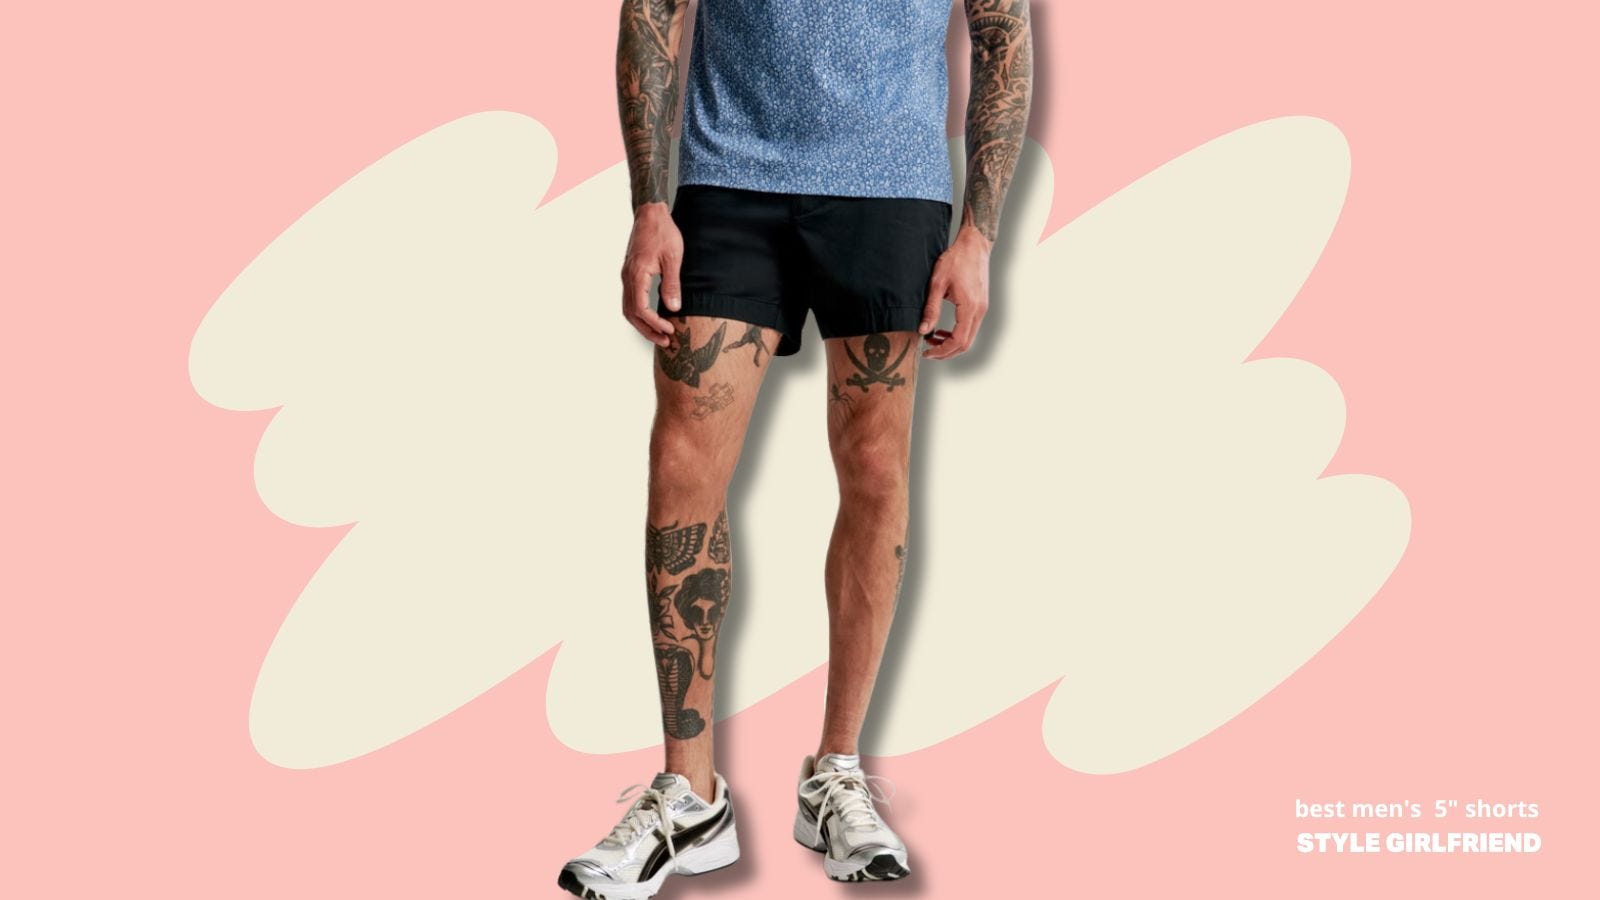 lower half of a man with many tattoos wearing a blue patterned short-sleeve shirt with dark shorts, and white running sneakers